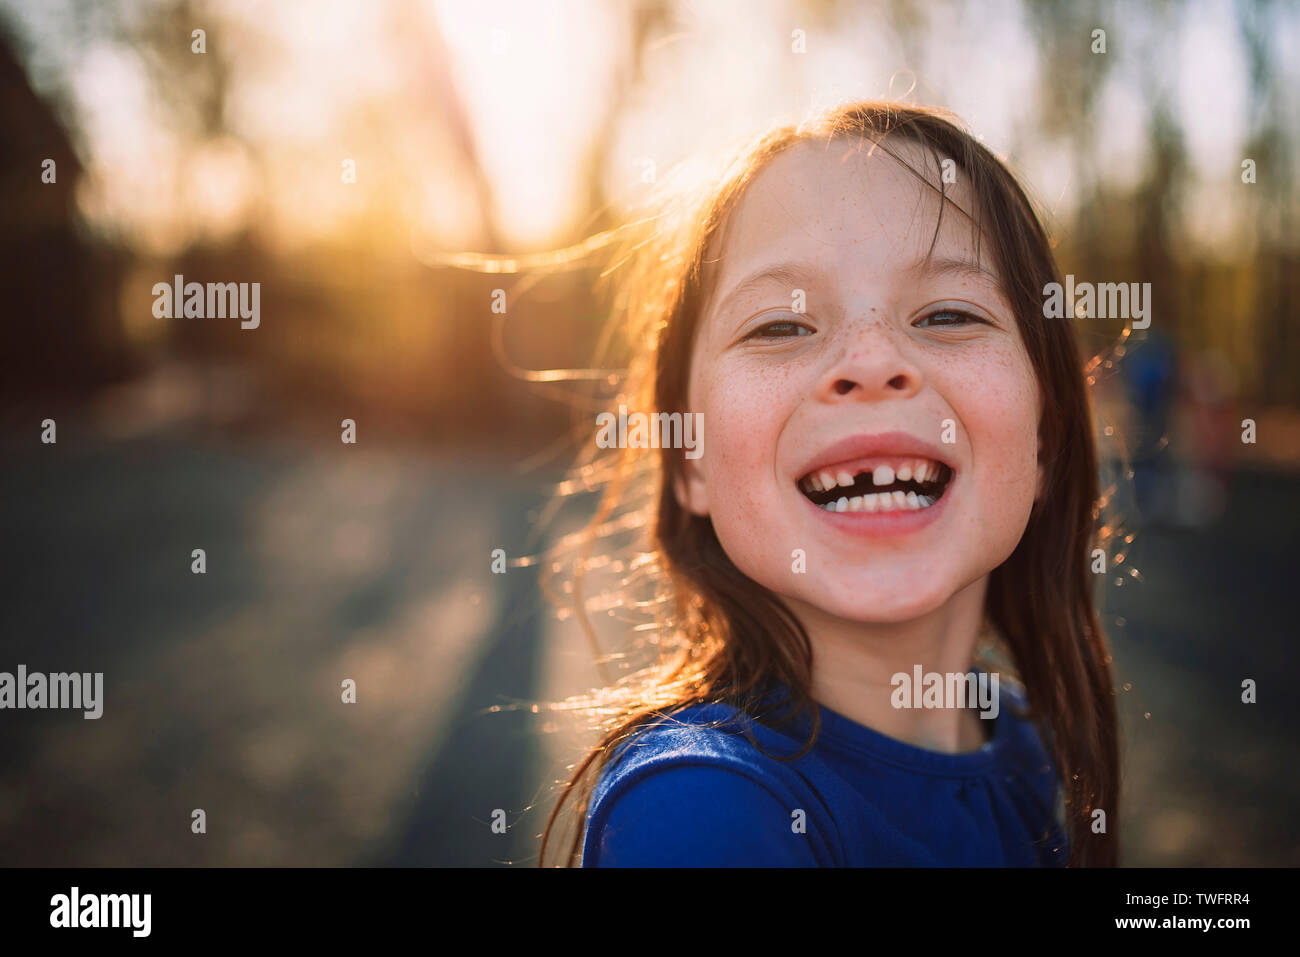 Portrait of a smiling girl with a missing tooth Stock Photo